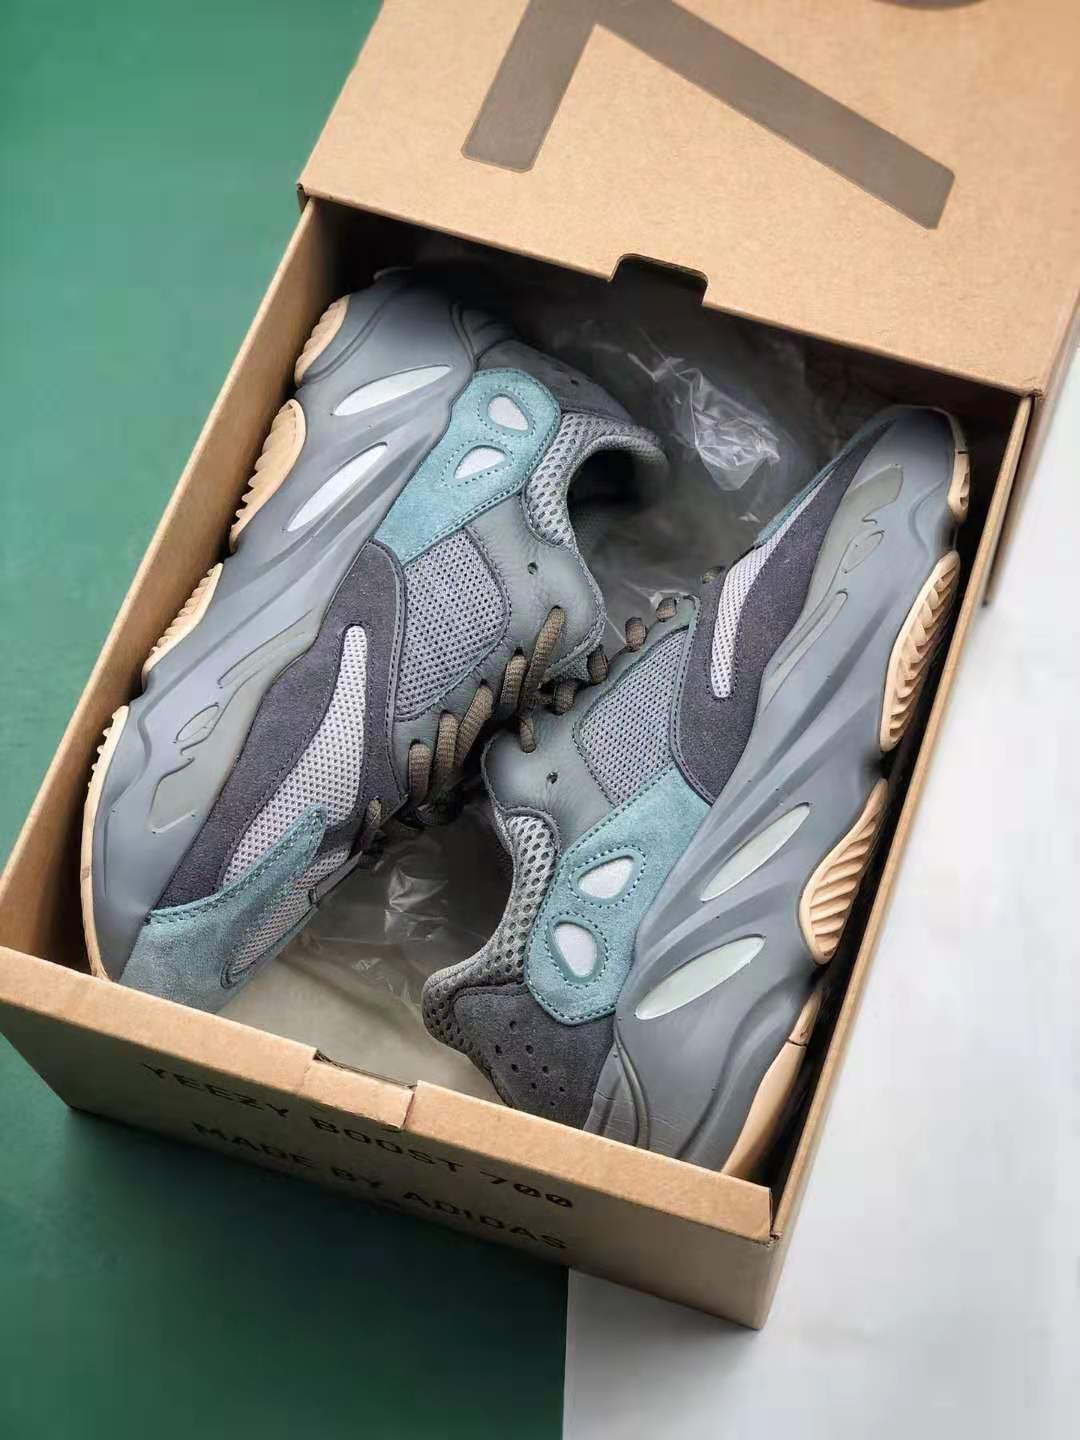 Adidas Yeezy Boost 700 Teal Blue FW2499 - Stylish and Comfortable Footwear